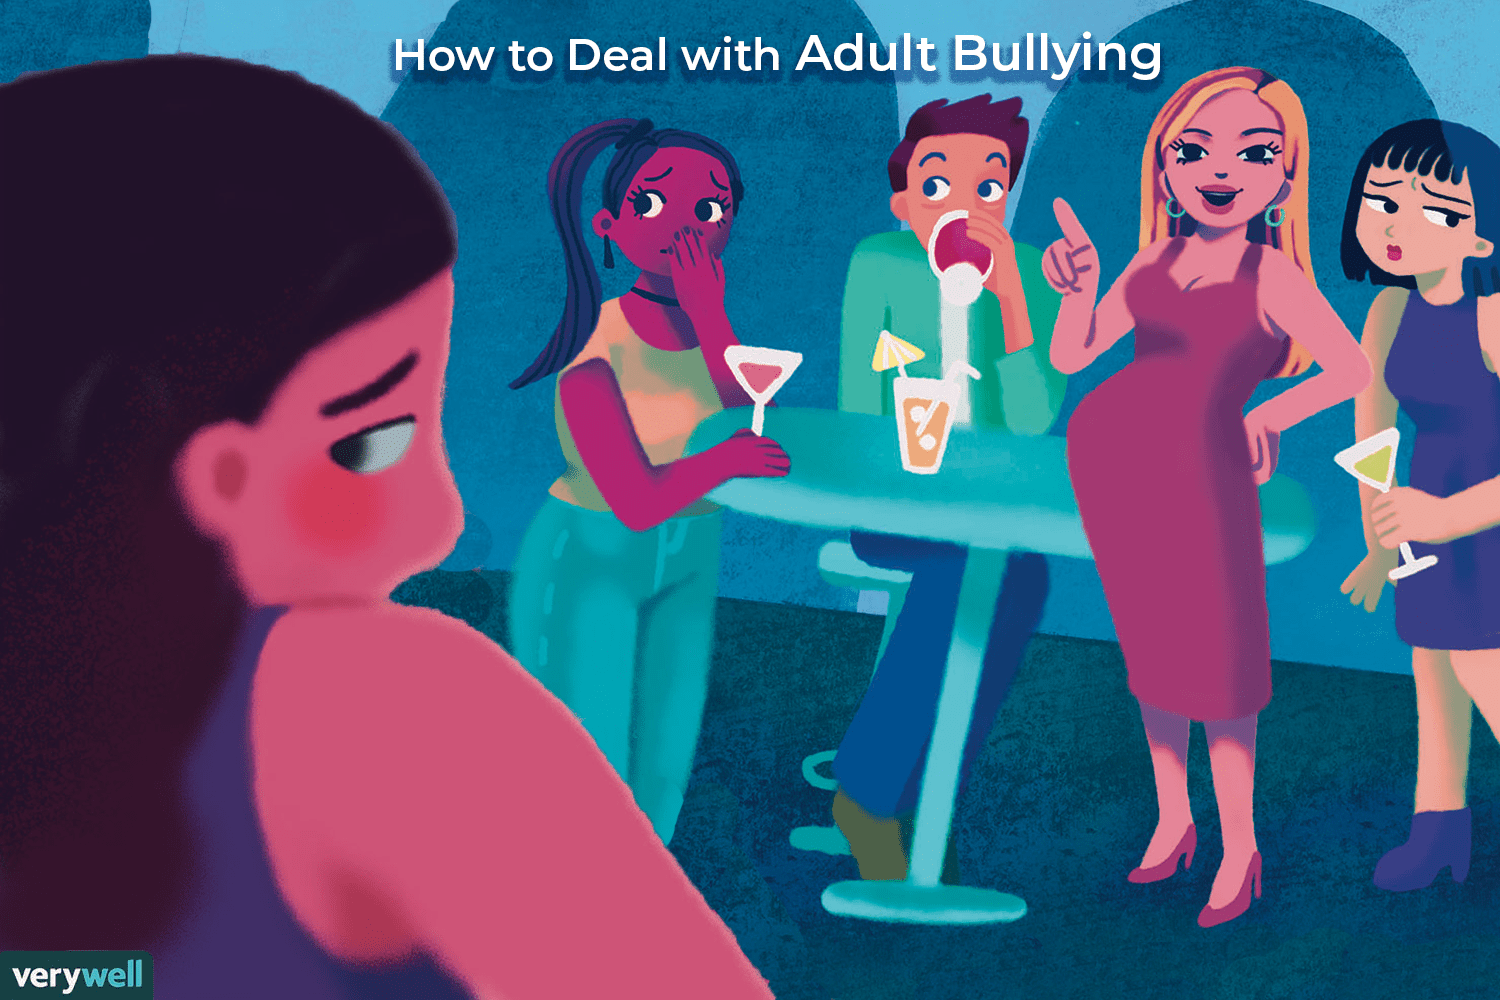 How to Effectively Deal with and Overcome Bullying